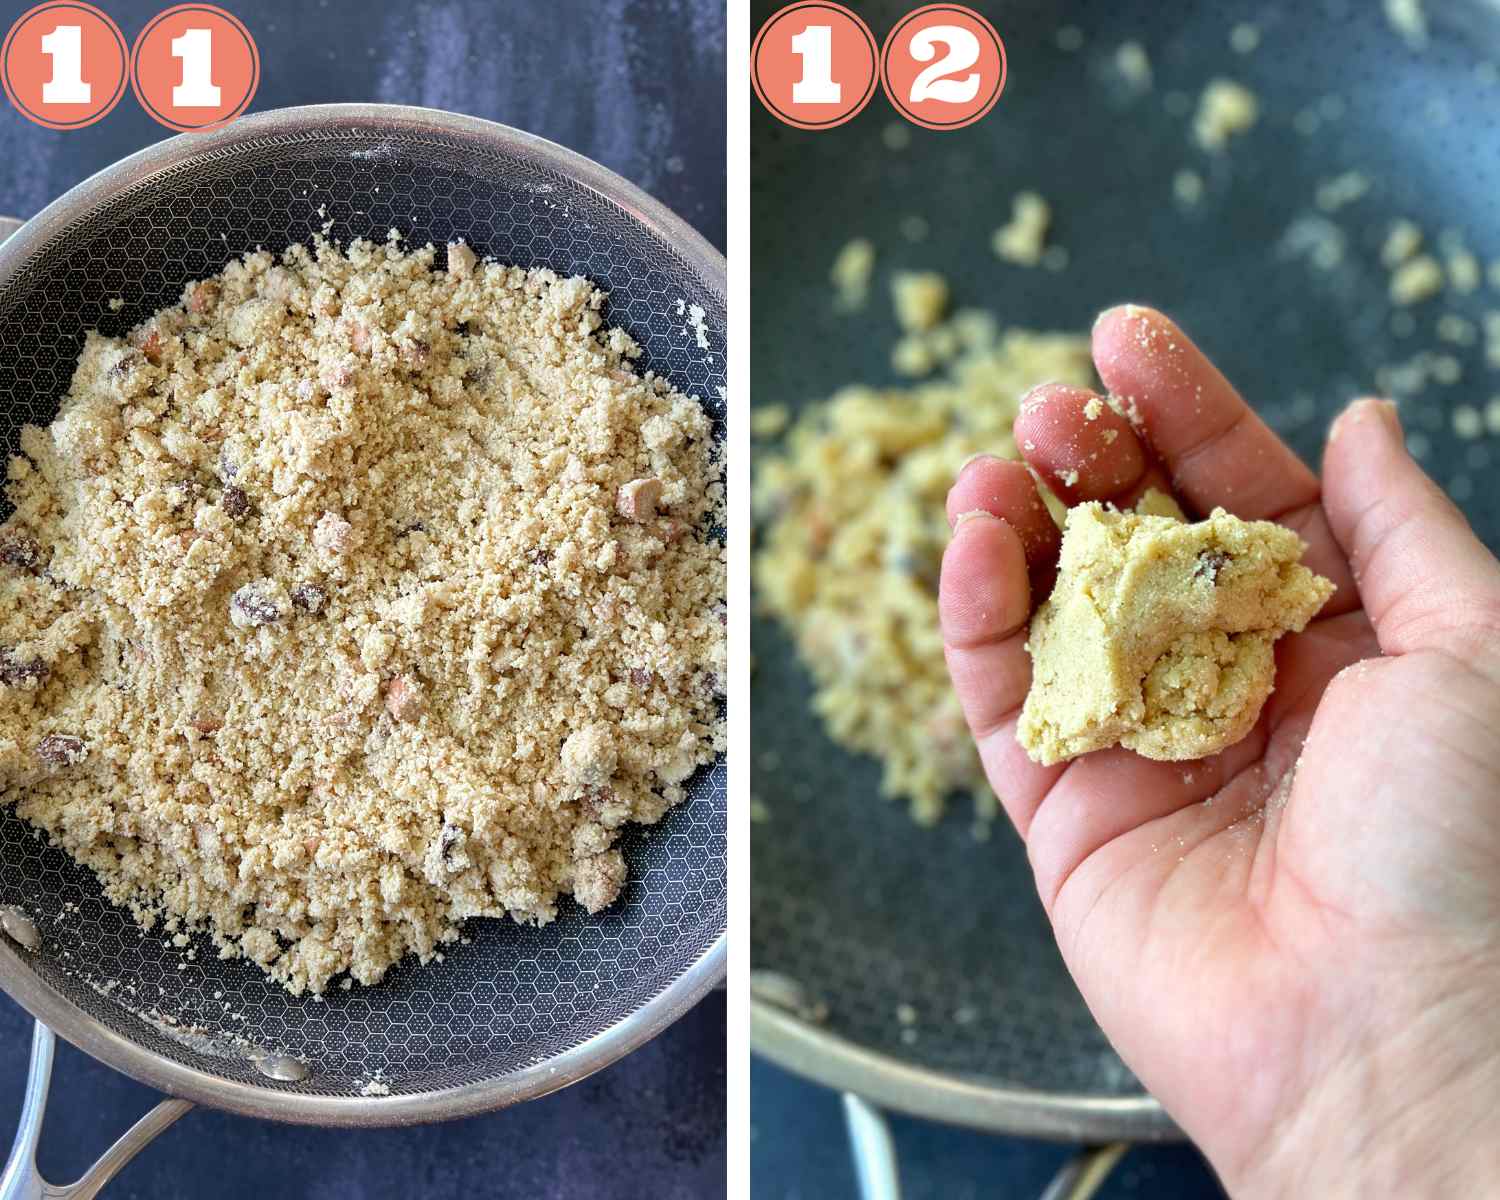 Collage steps to make rava ladoo; making the rava sugar mix and rolling it with the palms. 